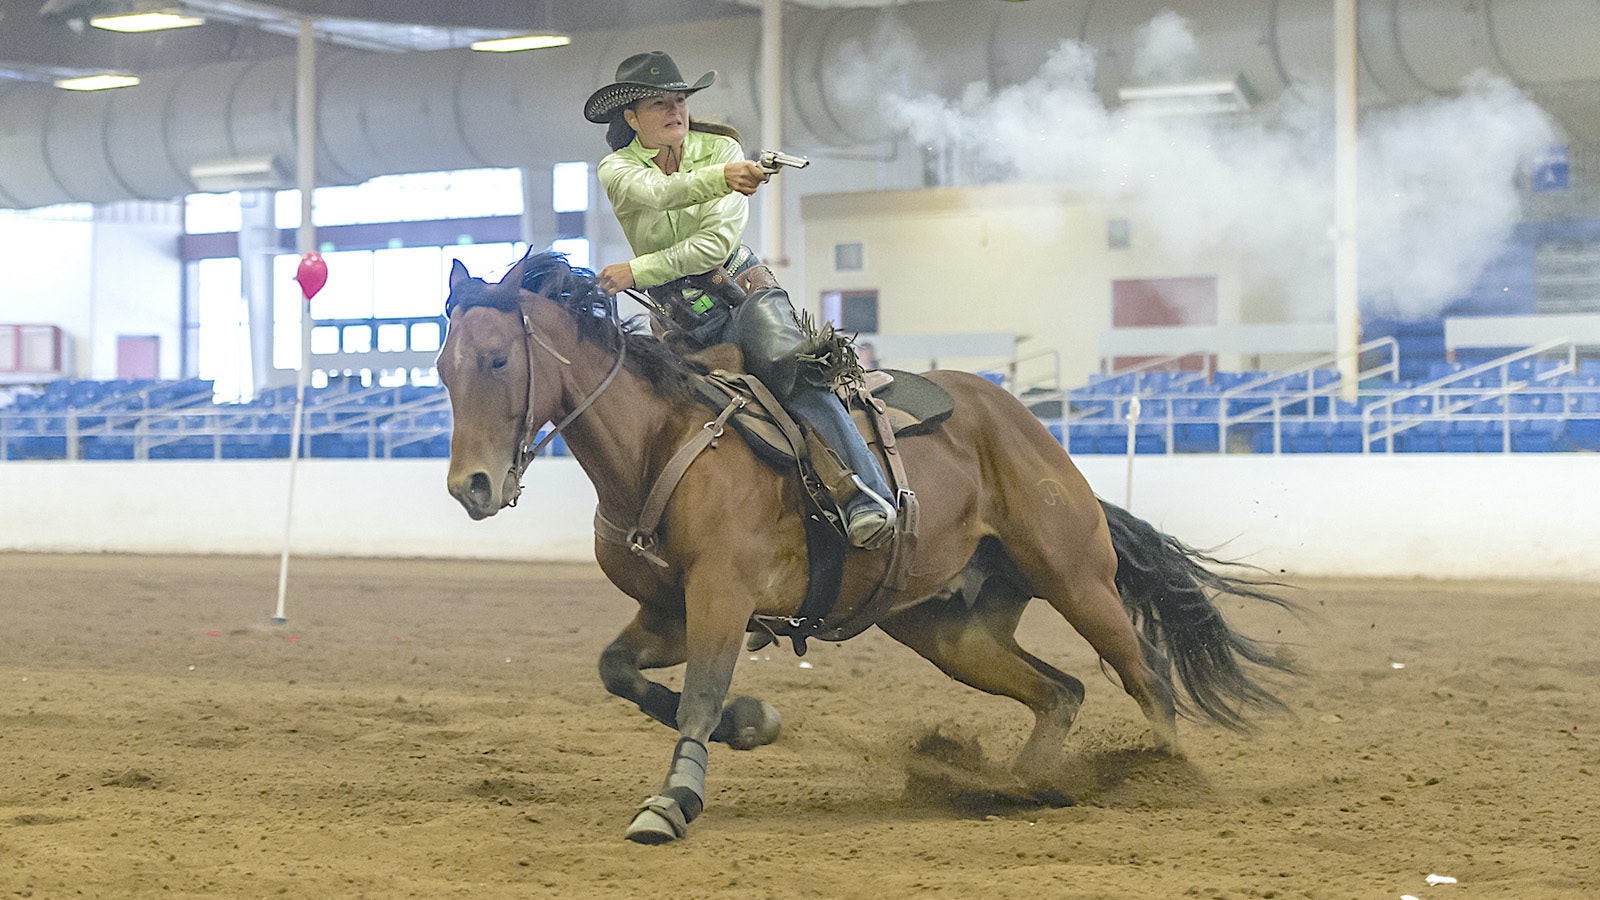 Lisa Grimsley of Star Valley hosted the first mounted shooting event in western Wyoming in 2016. She's pictured here shooting from her horse, Syngyne McCall.